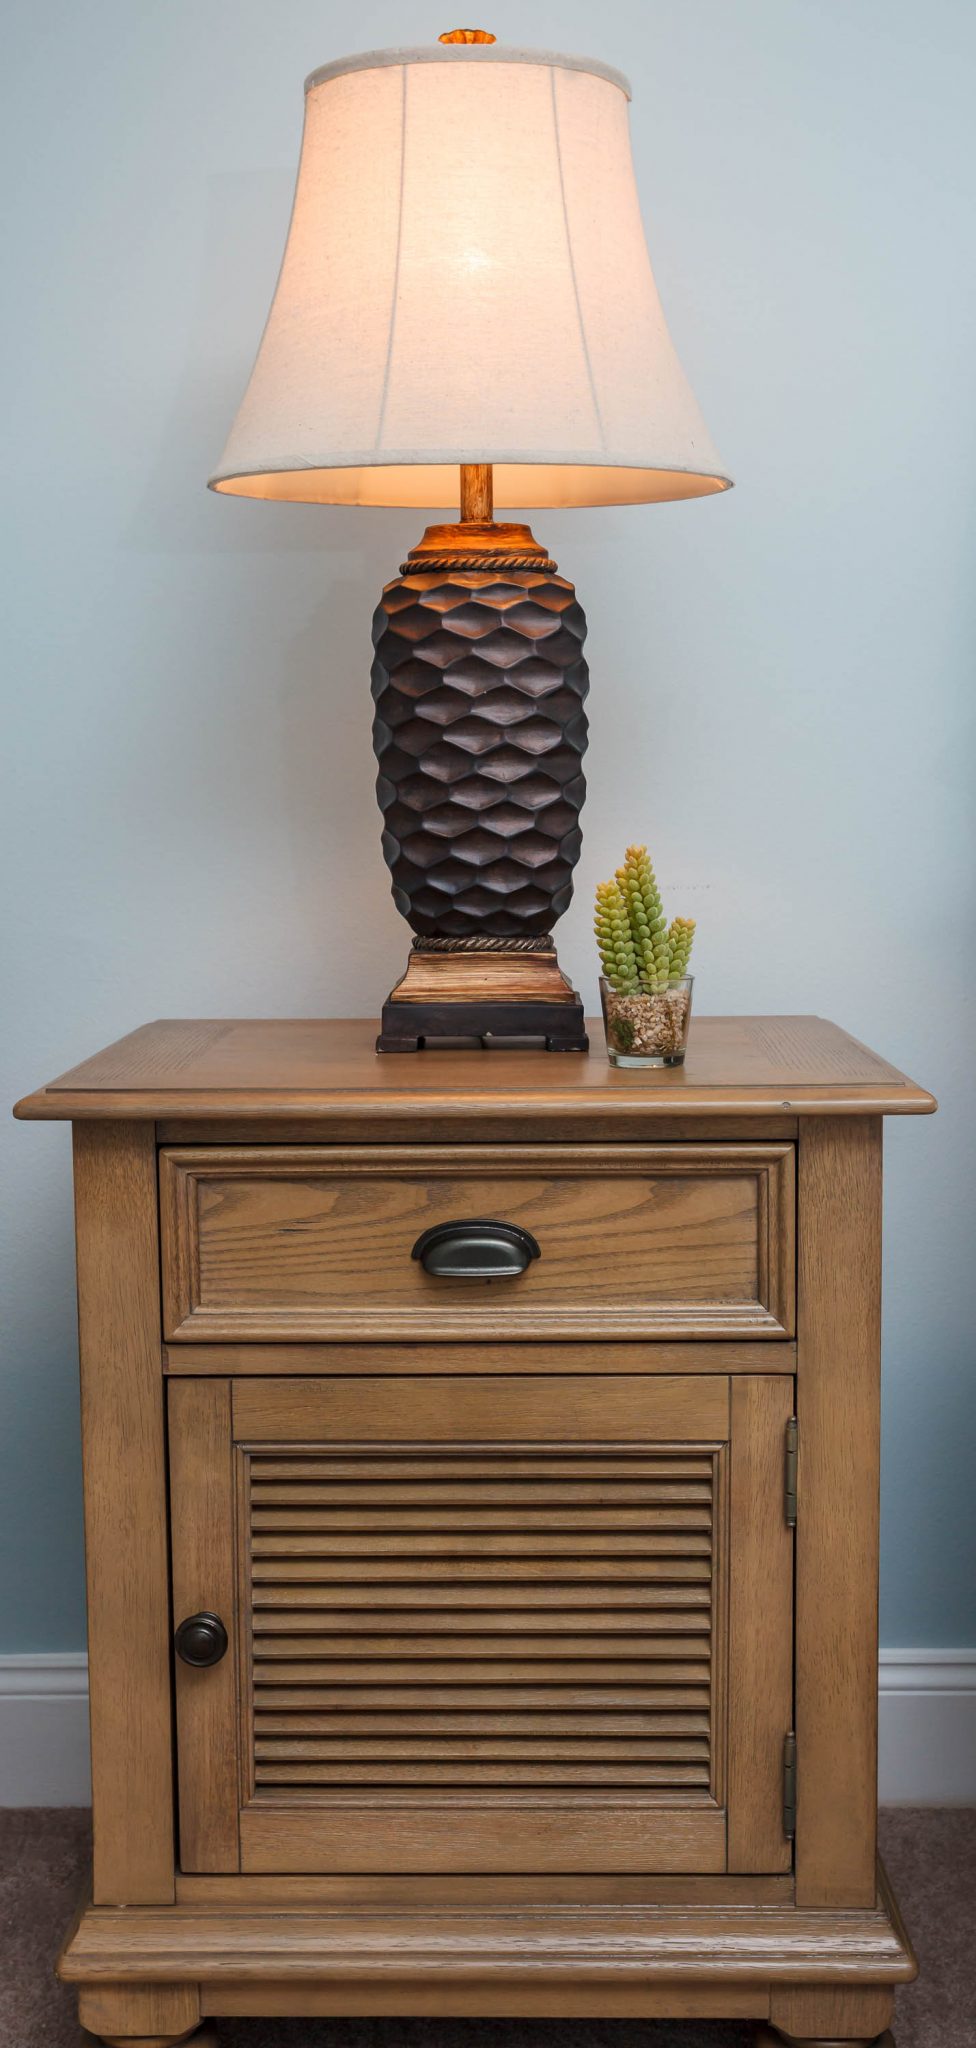 A Lamp and Night Stand | Home Accessories